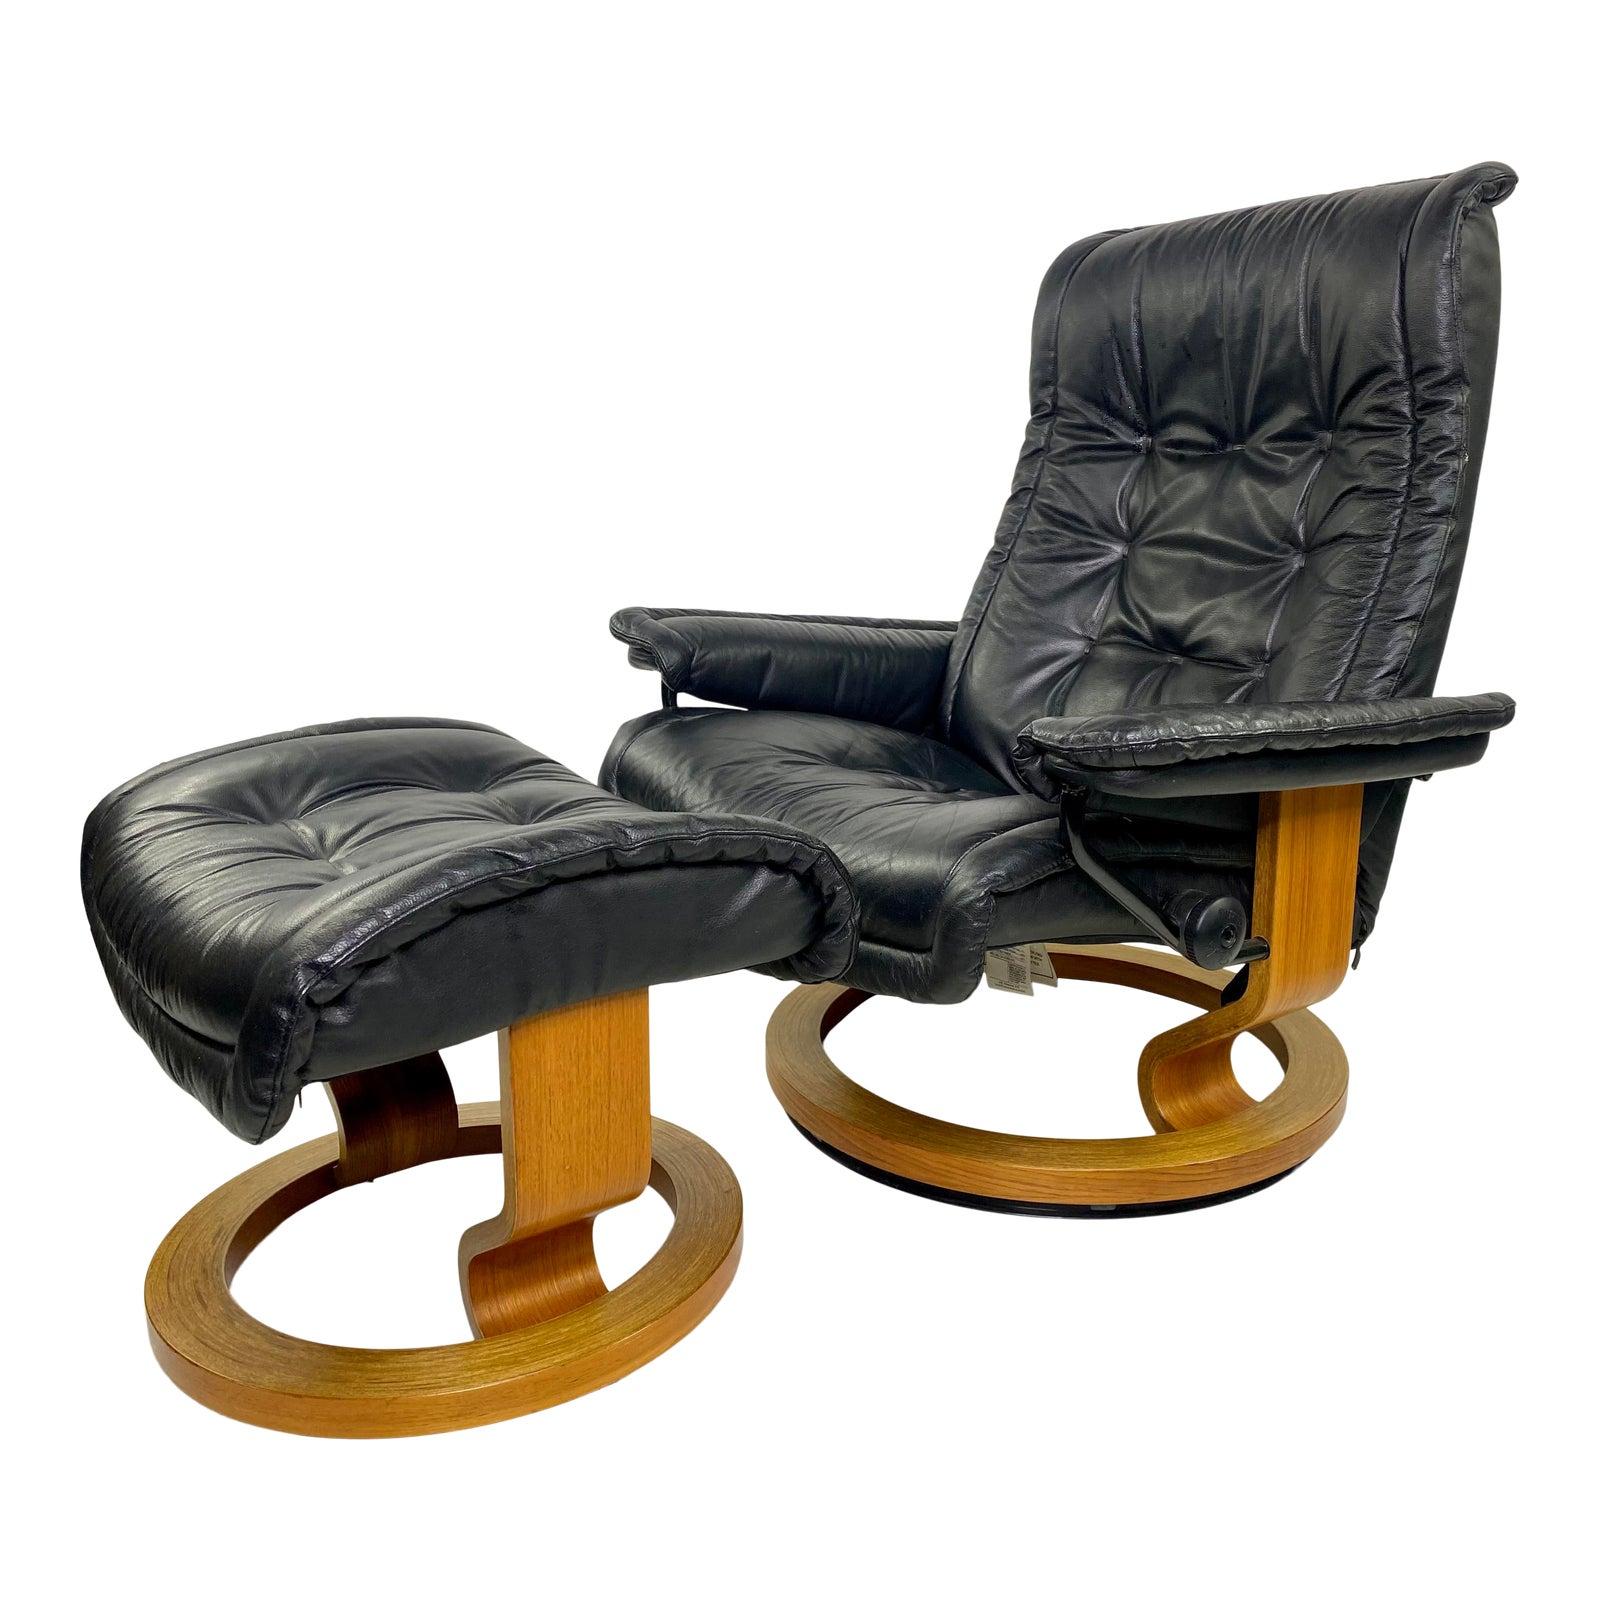 Stressless Recliner Chair And Ottoman, Scandinavian Leather Recliner With Ottoman